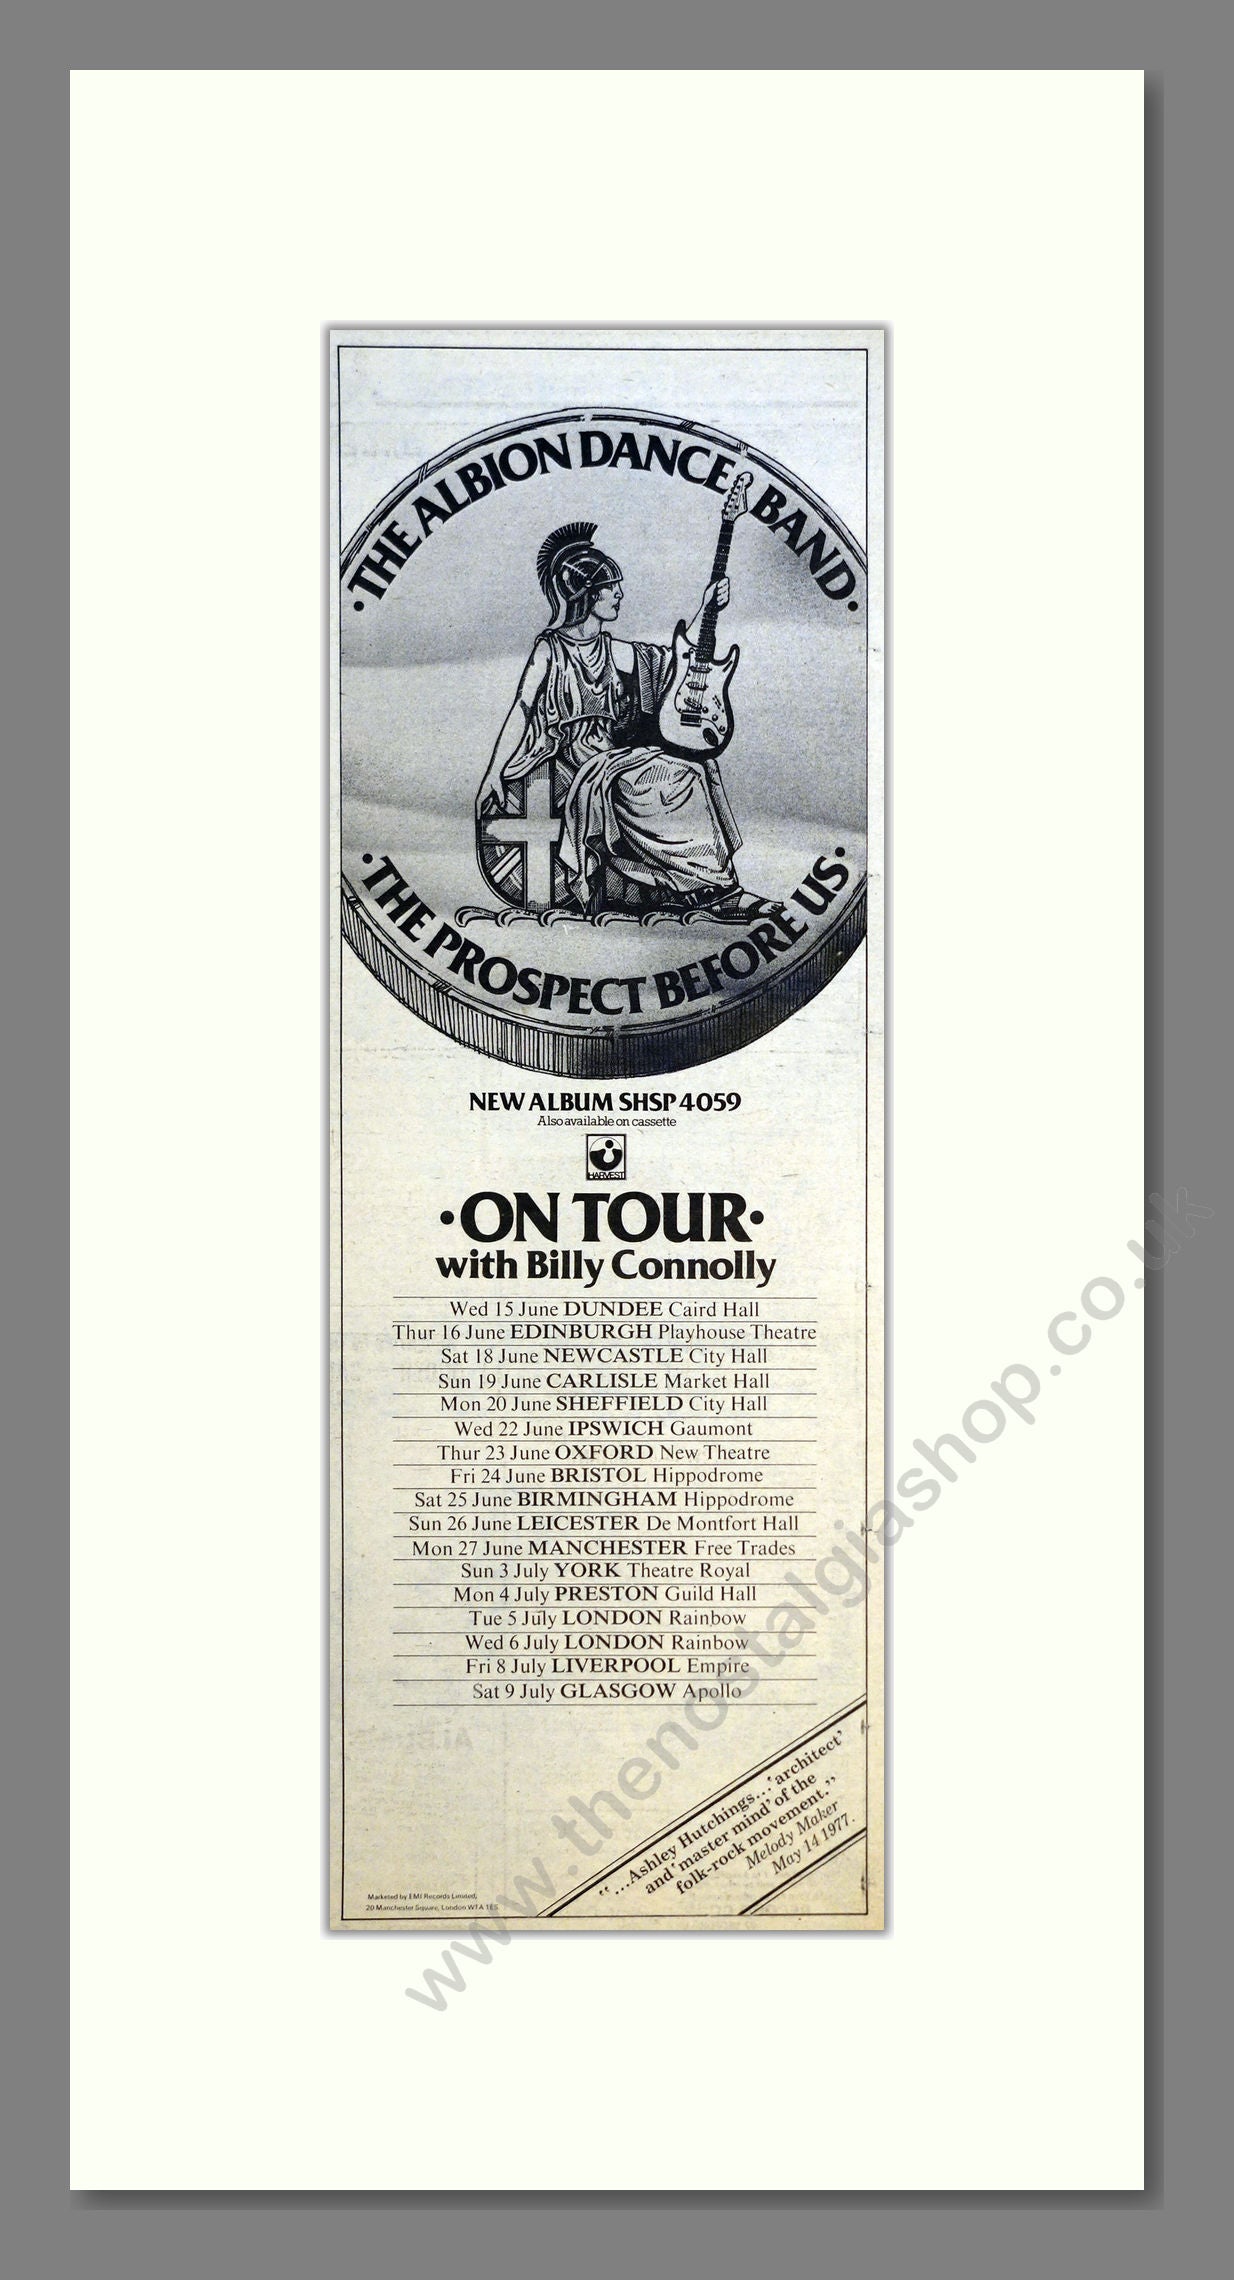 Albion Dance Band (The) - UK Tour with Billy Connolly. Vintage Advert 1977 (ref AD200811)